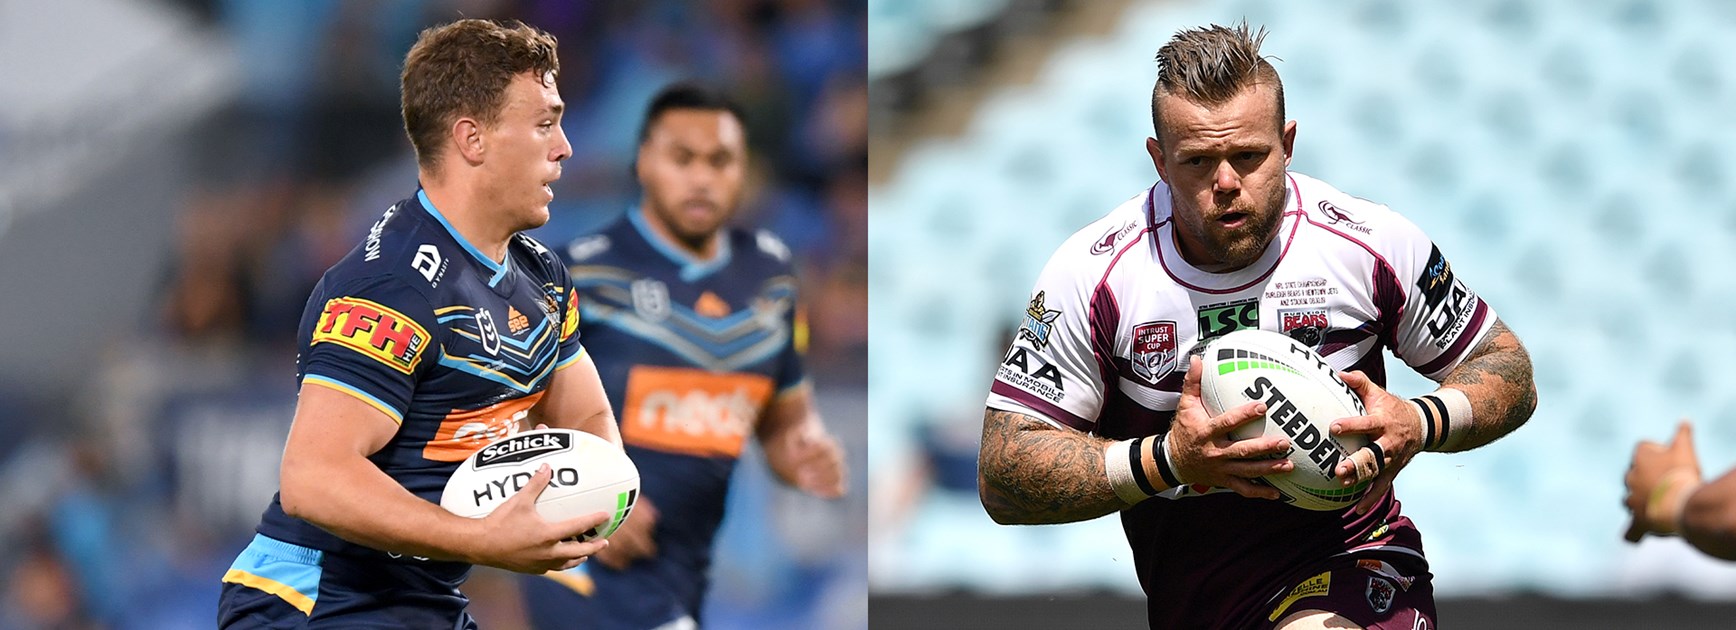 Key Matchup: Page and Whitbread to set the tone for trial